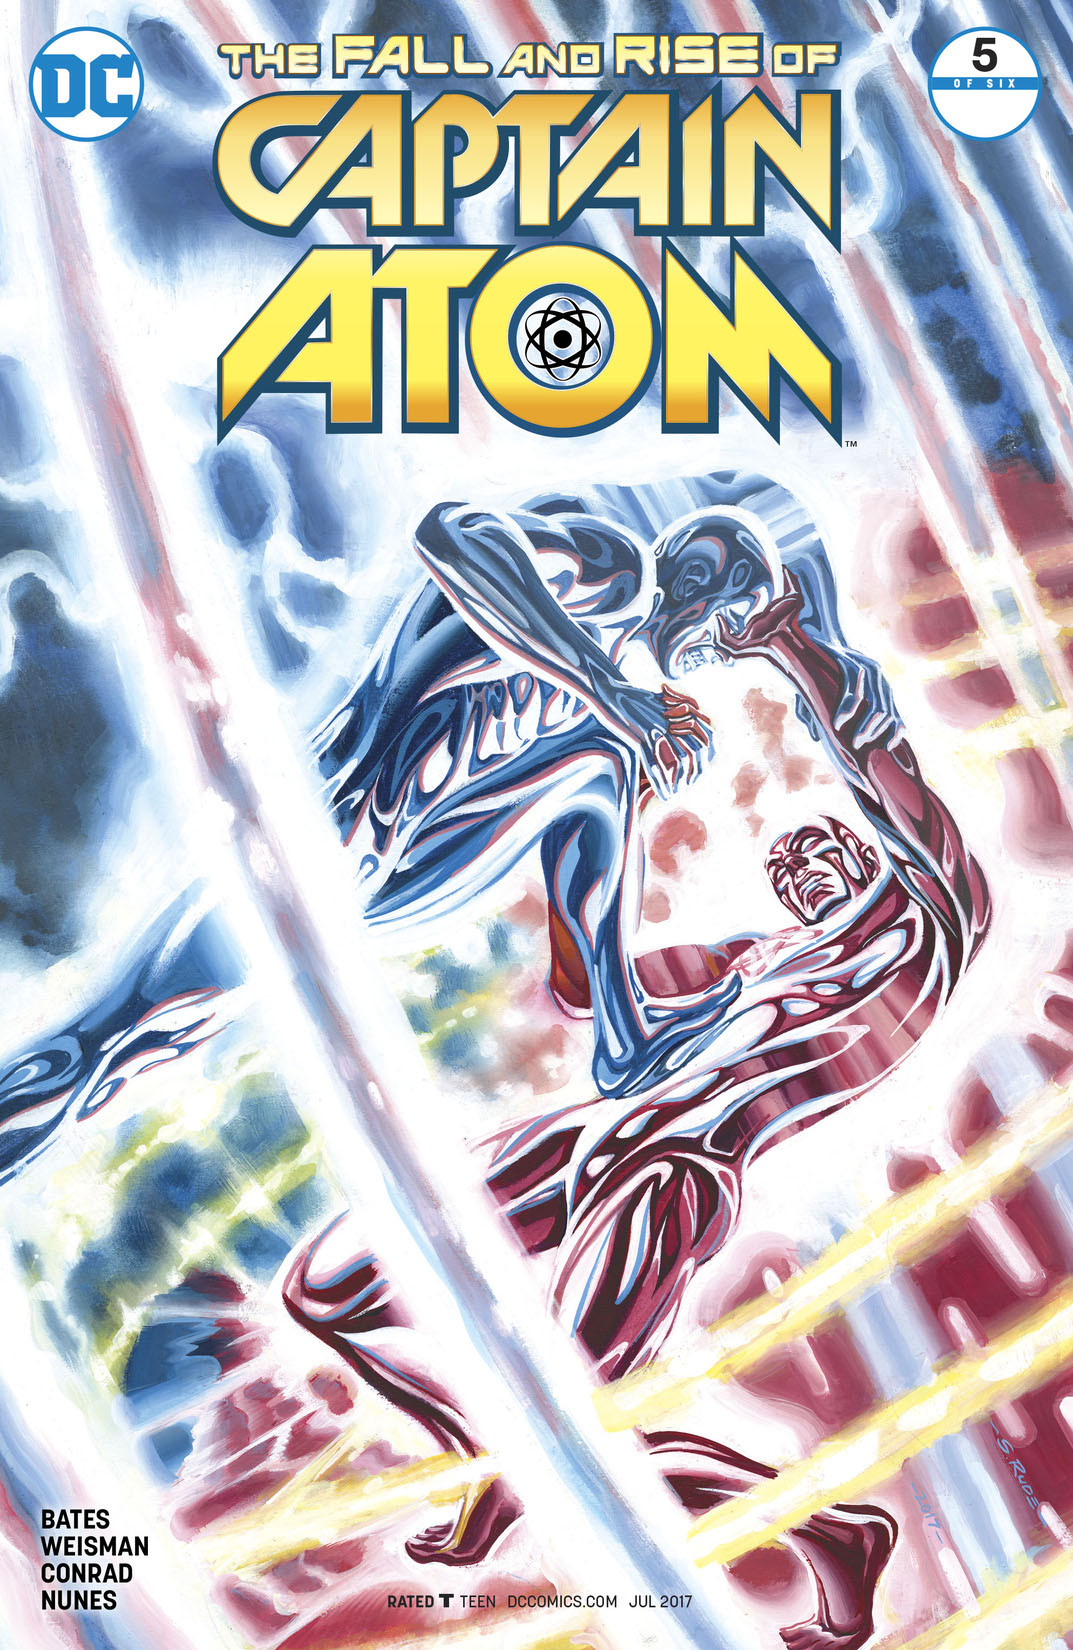 The Fall and Rise of Captain Atom #5 preview images